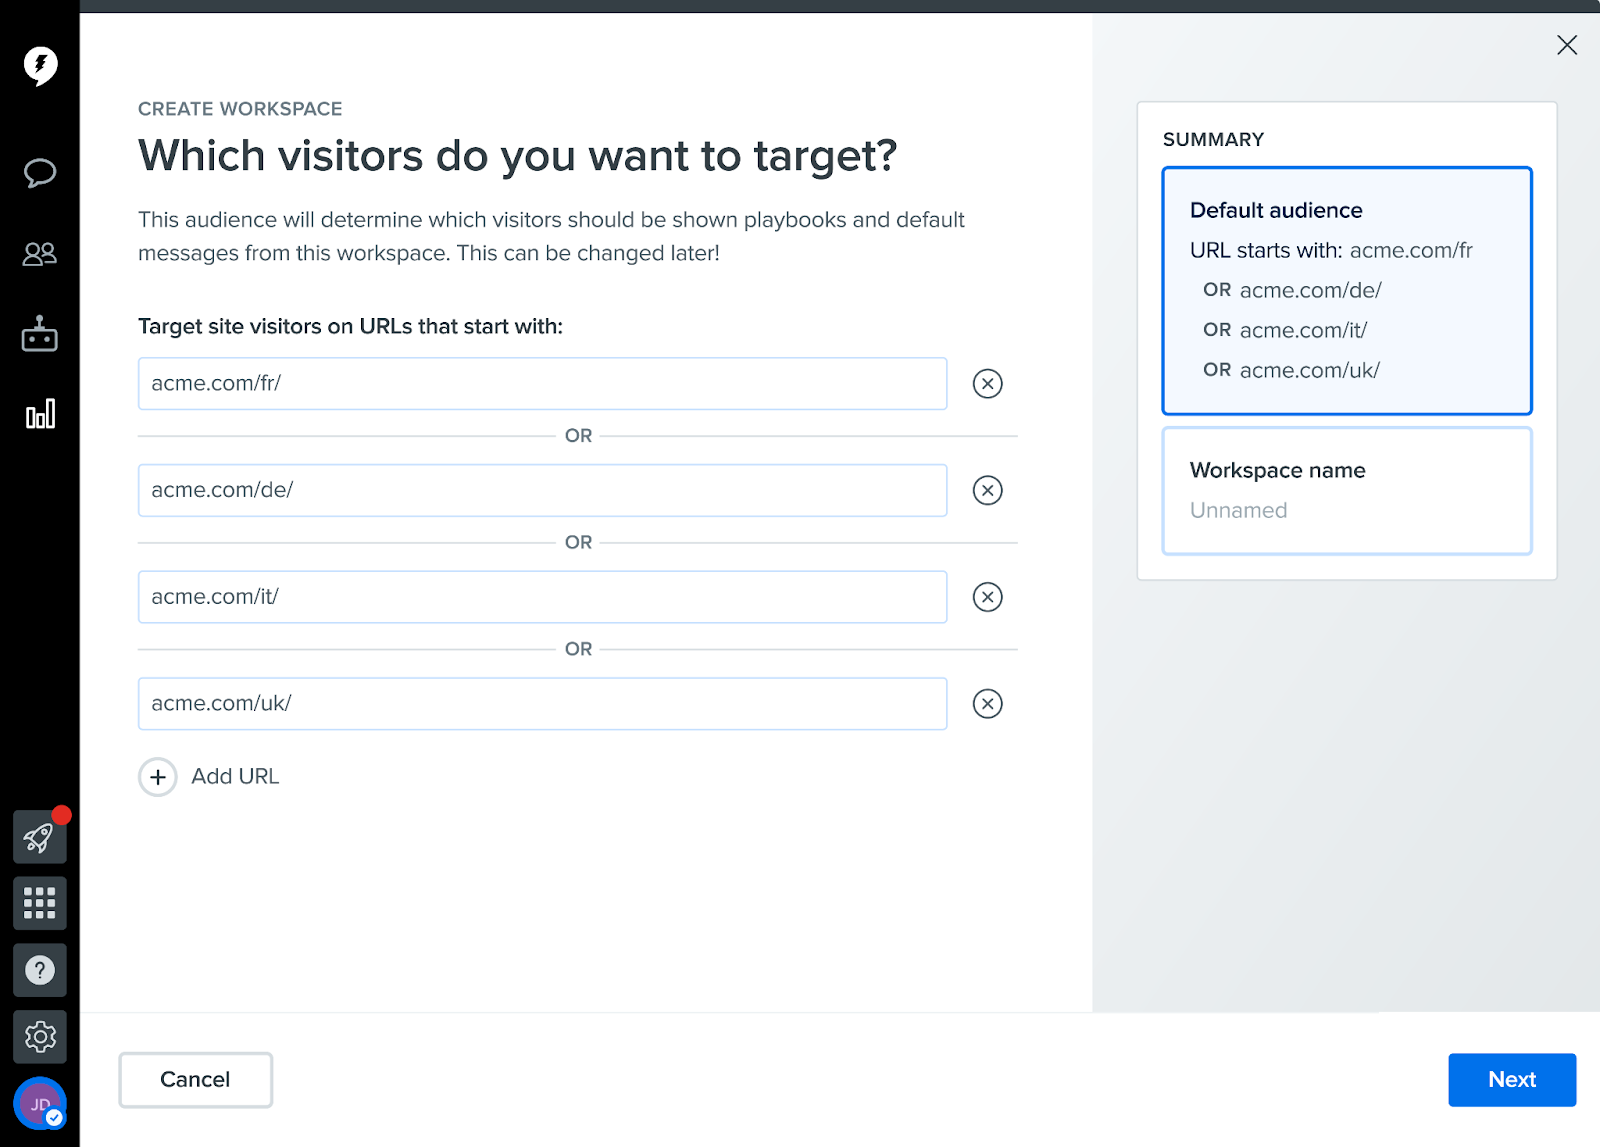 Screenshot of the Drift workflows target audience creator page